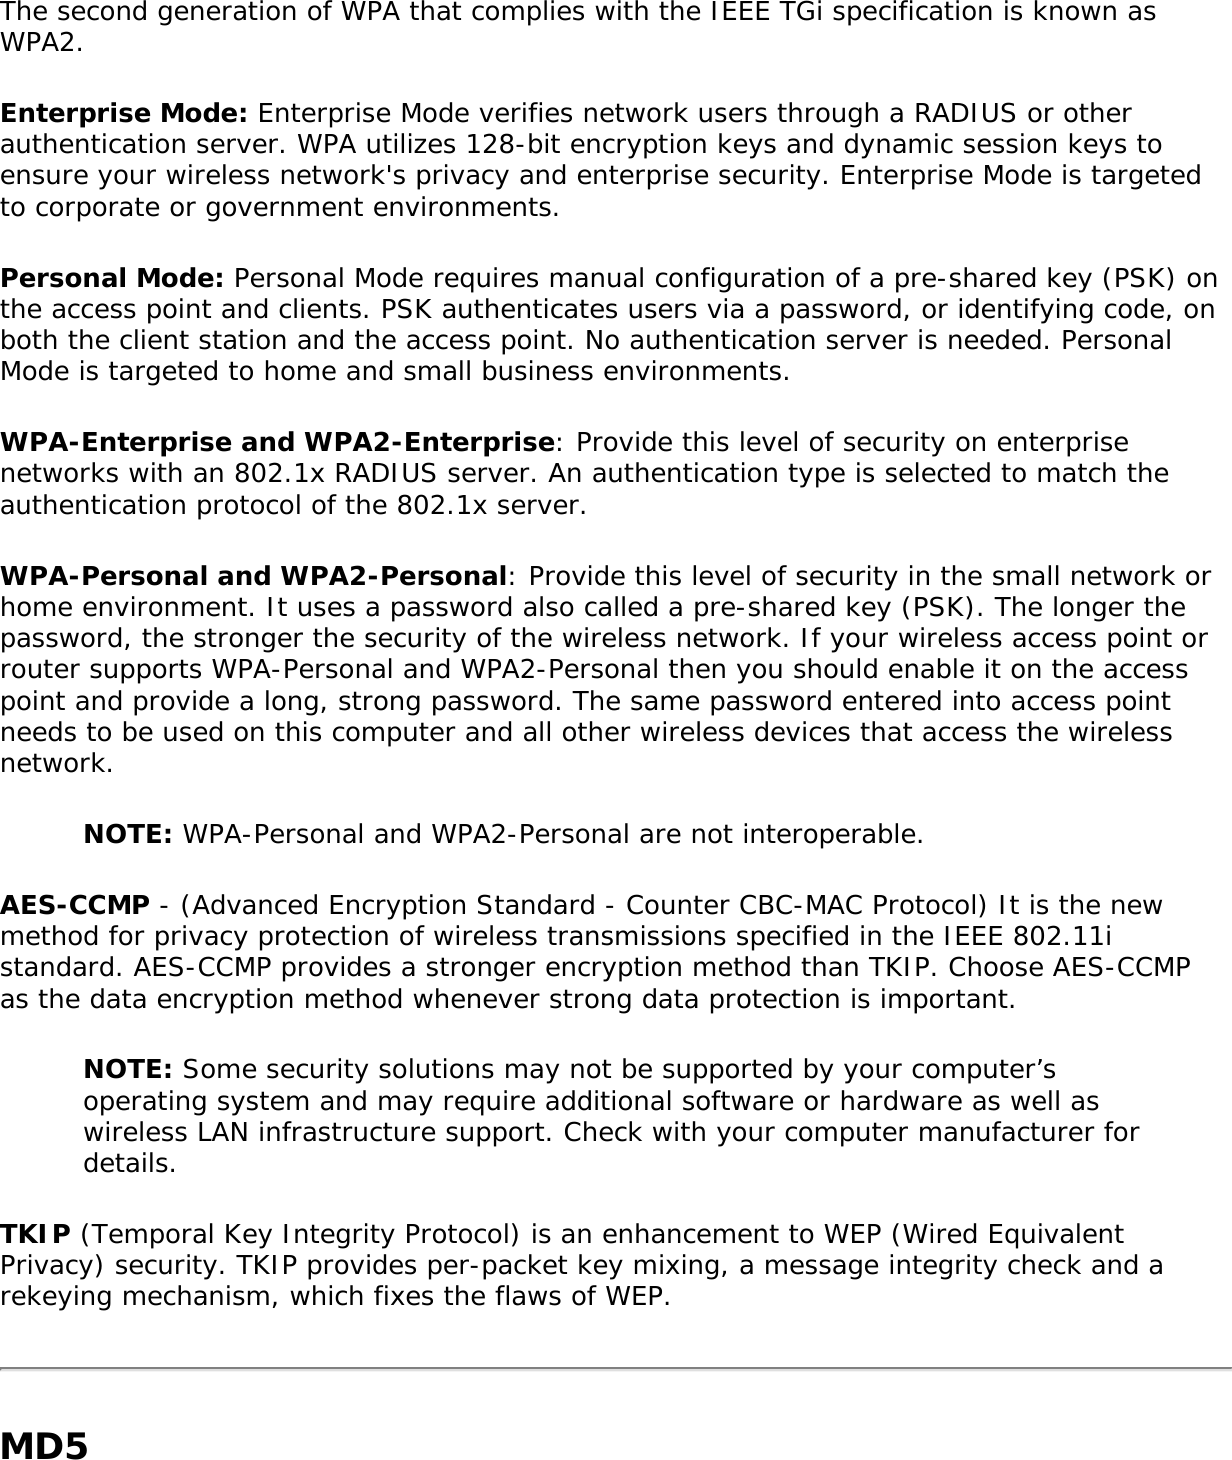 The second generation of WPA that complies with the IEEE TGi specification is known as WPA2. Enterprise Mode: Enterprise Mode verifies network users through a RADIUS or other authentication server. WPA utilizes 128-bit encryption keys and dynamic session keys to ensure your wireless network&apos;s privacy and enterprise security. Enterprise Mode is targeted to corporate or government environments. Personal Mode: Personal Mode requires manual configuration of a pre-shared key (PSK) on the access point and clients. PSK authenticates users via a password, or identifying code, on both the client station and the access point. No authentication server is needed. Personal Mode is targeted to home and small business environments. WPA-Enterprise and WPA2-Enterprise: Provide this level of security on enterprise networks with an 802.1x RADIUS server. An authentication type is selected to match the authentication protocol of the 802.1x server. WPA-Personal and WPA2-Personal: Provide this level of security in the small network or home environment. It uses a password also called a pre-shared key (PSK). The longer the password, the stronger the security of the wireless network. If your wireless access point or router supports WPA-Personal and WPA2-Personal then you should enable it on the access point and provide a long, strong password. The same password entered into access point needs to be used on this computer and all other wireless devices that access the wireless network. NOTE: WPA-Personal and WPA2-Personal are not interoperable. AES-CCMP - (Advanced Encryption Standard - Counter CBC-MAC Protocol) It is the new method for privacy protection of wireless transmissions specified in the IEEE 802.11i standard. AES-CCMP provides a stronger encryption method than TKIP. Choose AES-CCMP as the data encryption method whenever strong data protection is important. NOTE: Some security solutions may not be supported by your computer’s operating system and may require additional software or hardware as well as wireless LAN infrastructure support. Check with your computer manufacturer for details. TKIP (Temporal Key Integrity Protocol) is an enhancement to WEP (Wired Equivalent Privacy) security. TKIP provides per-packet key mixing, a message integrity check and a rekeying mechanism, which fixes the flaws of WEP. MD5 